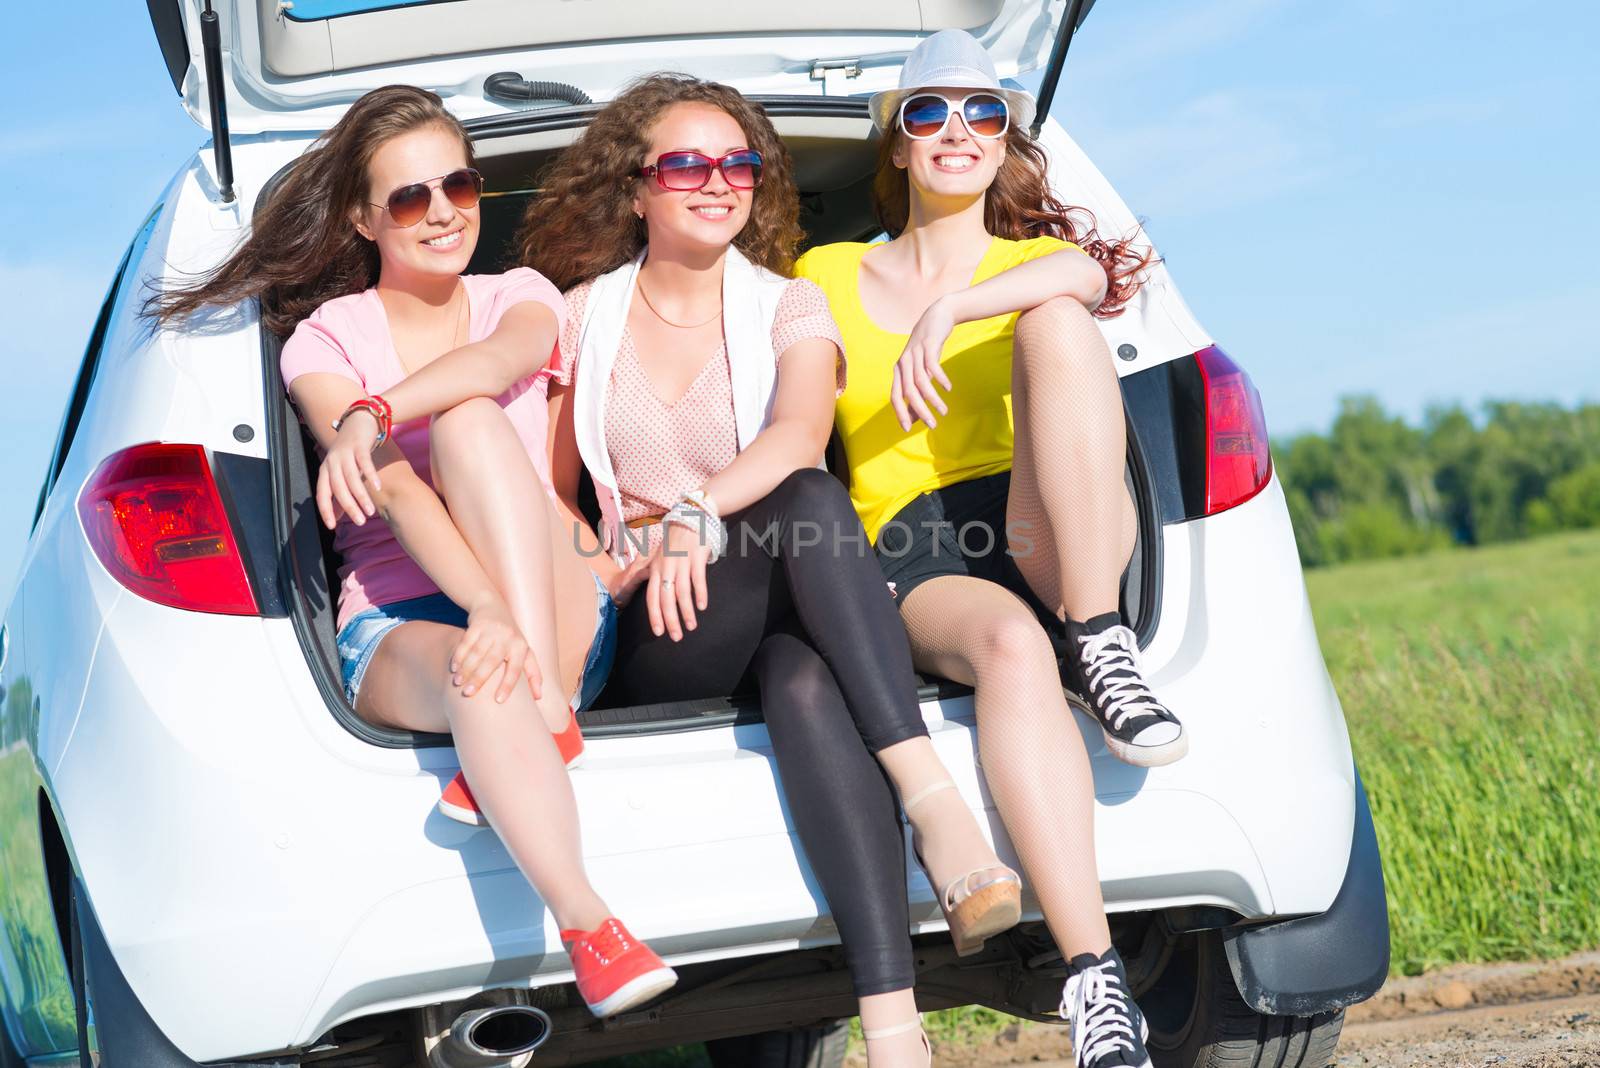 young attractive woman sitting in the open trunk of a new car, a summer road trip